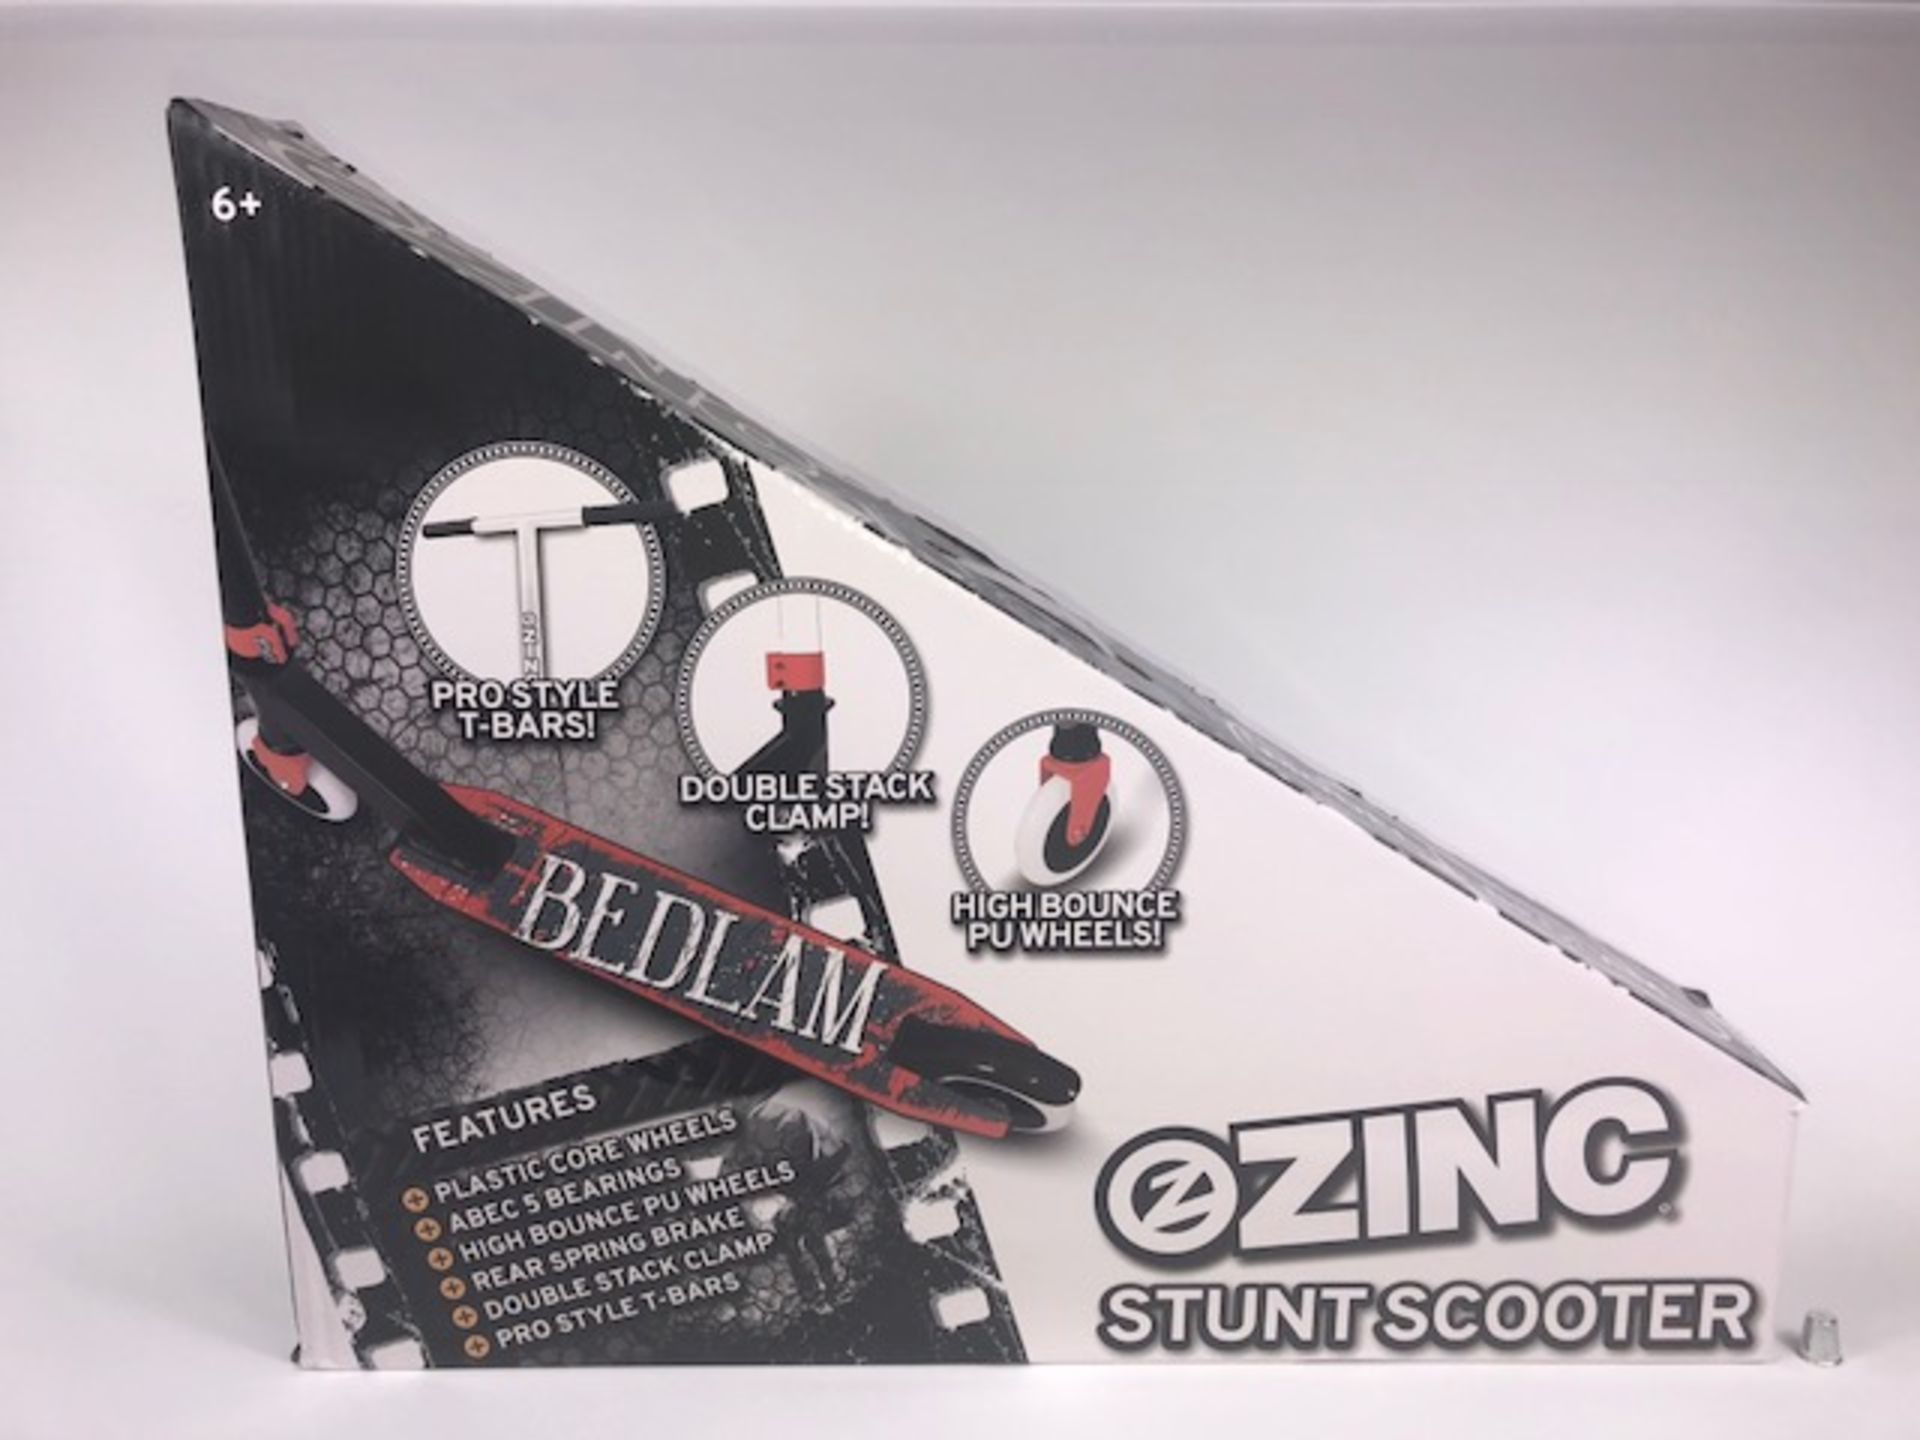 6 X BRAND NEW BOXED BEDLAM ZINC STUNT SCOOTERS IN 3 BOXES